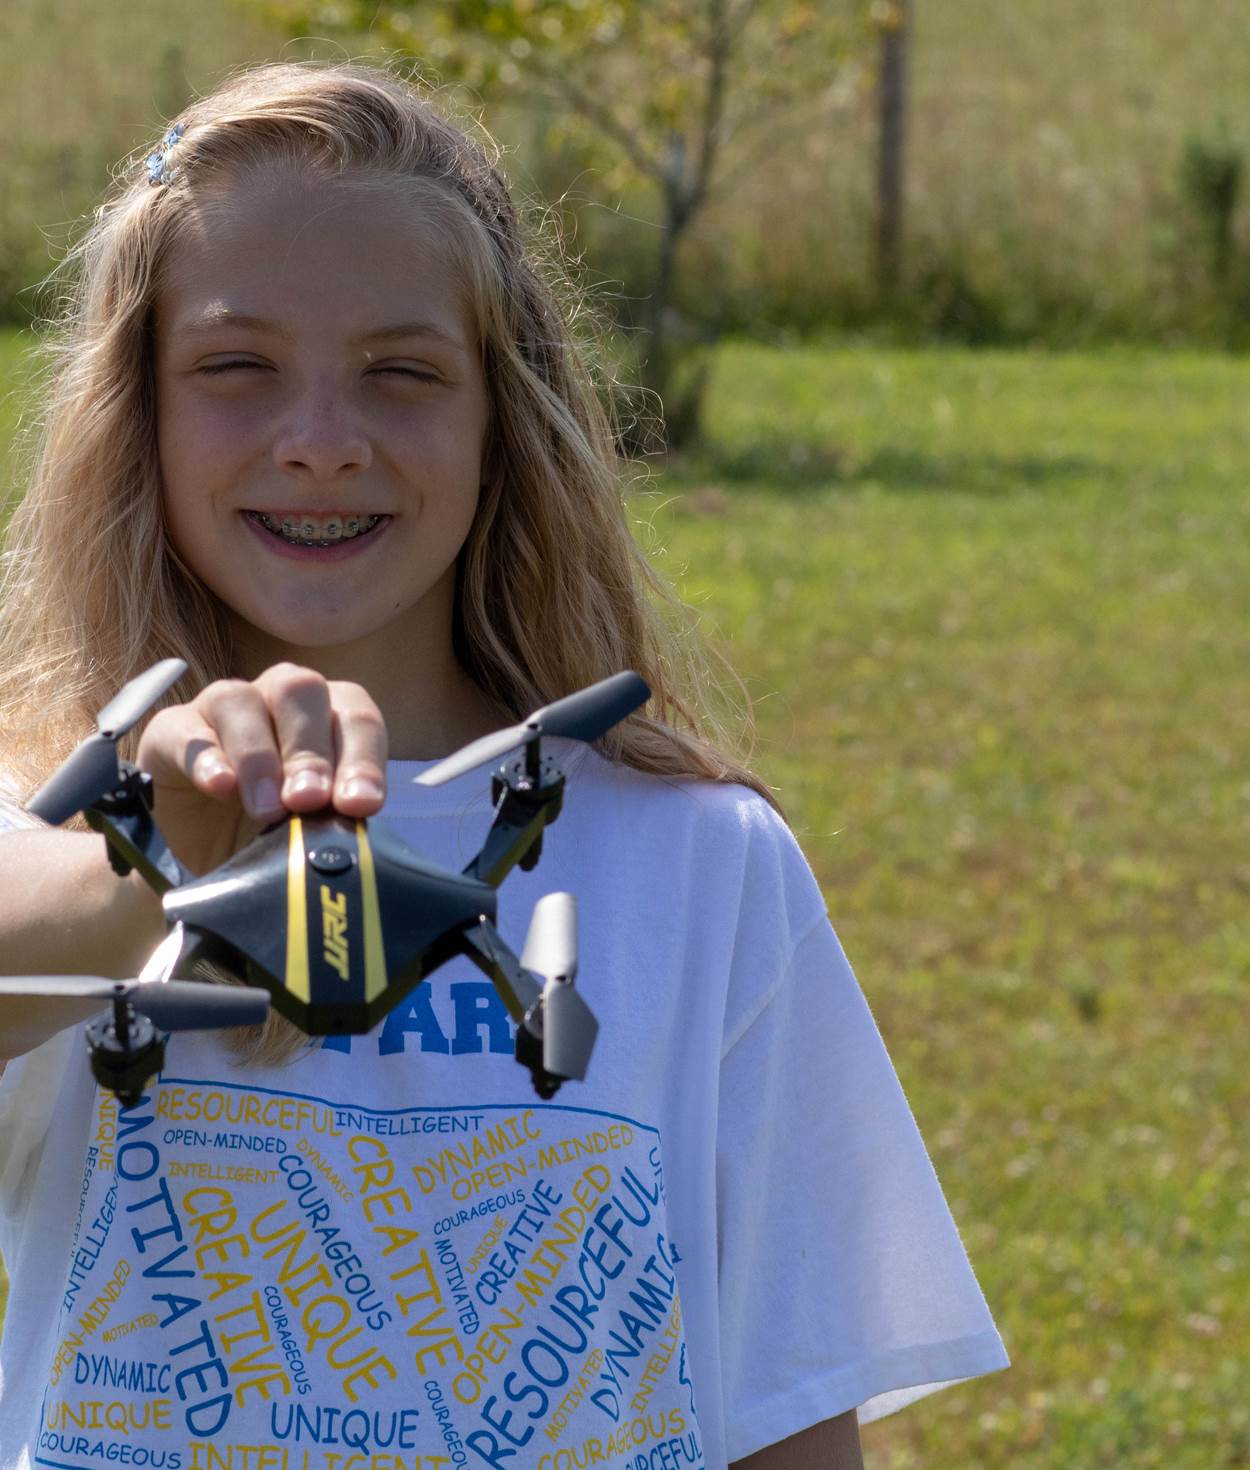 A girl holding her drone and smiling.